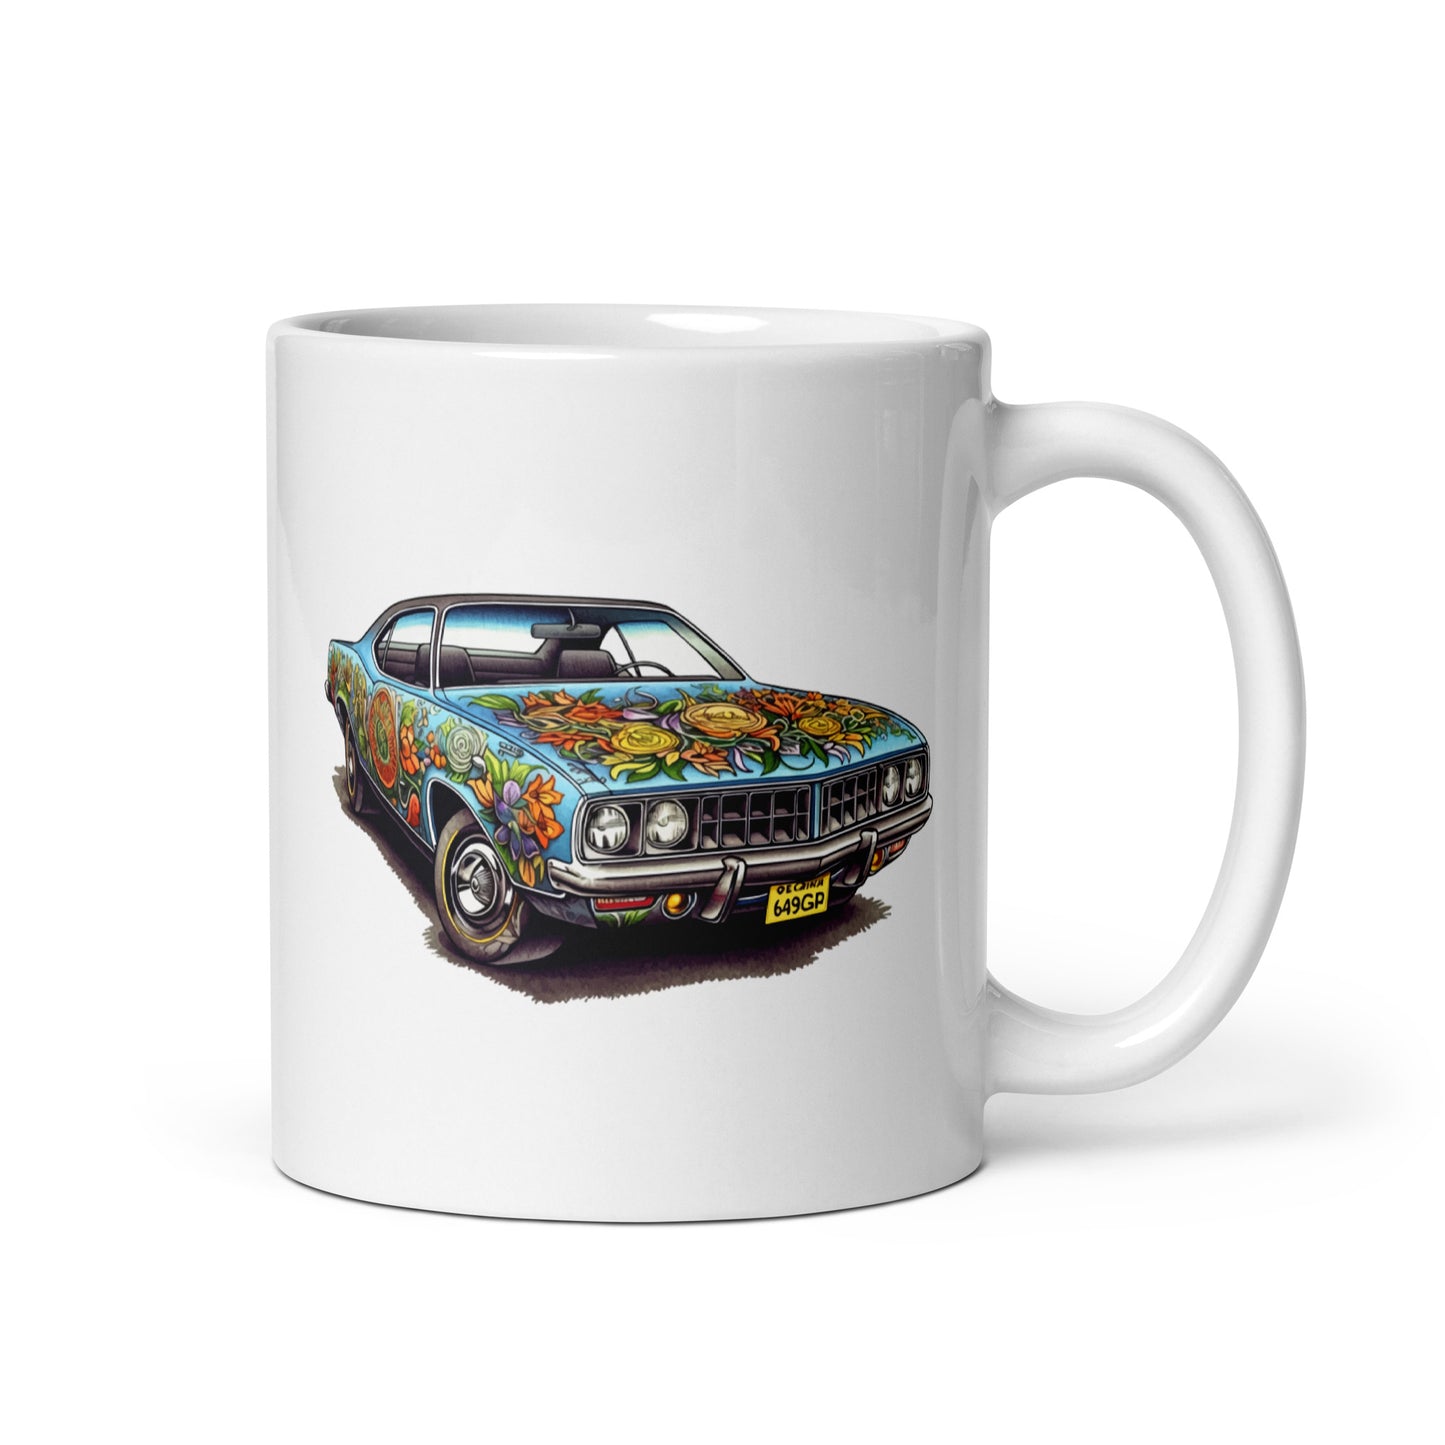 Folk style, Muscle car illustration, Classic car on cup, Flowers on car, Gift for country lovers - White glossy mug